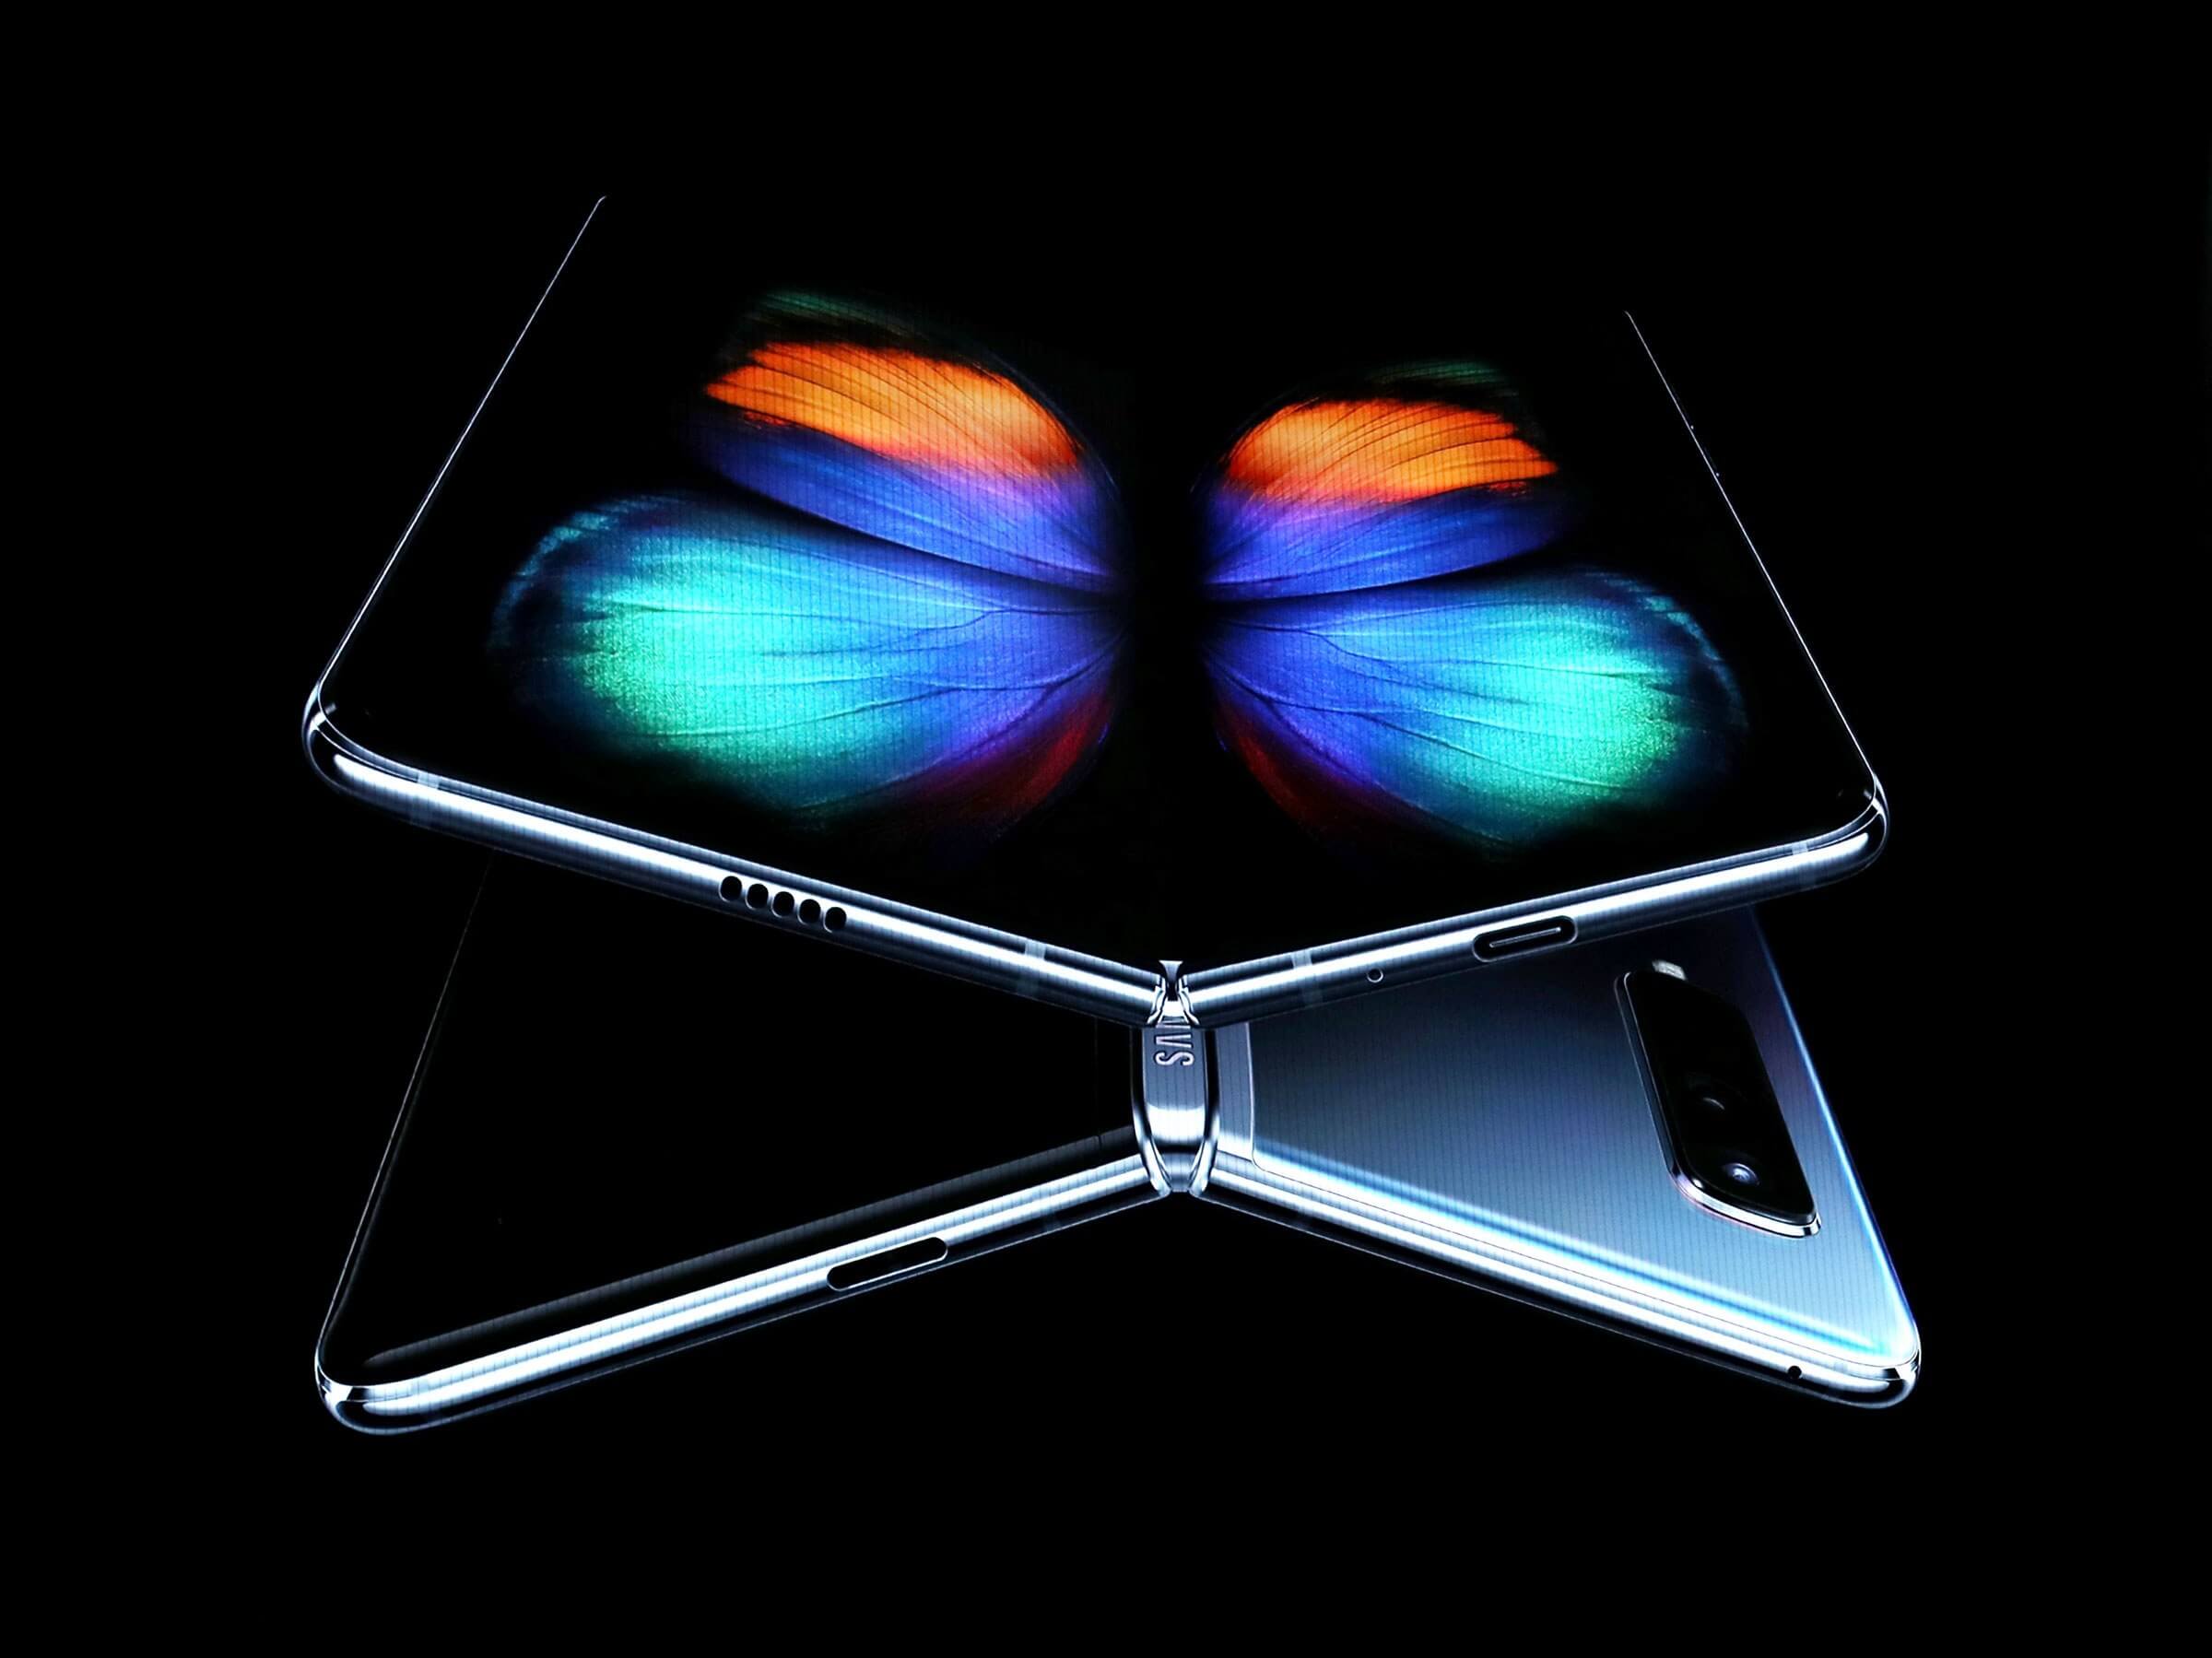 Samsung confirms Galaxy Fold will relaunch on September 6 in South Korea, hits US in coming weeks